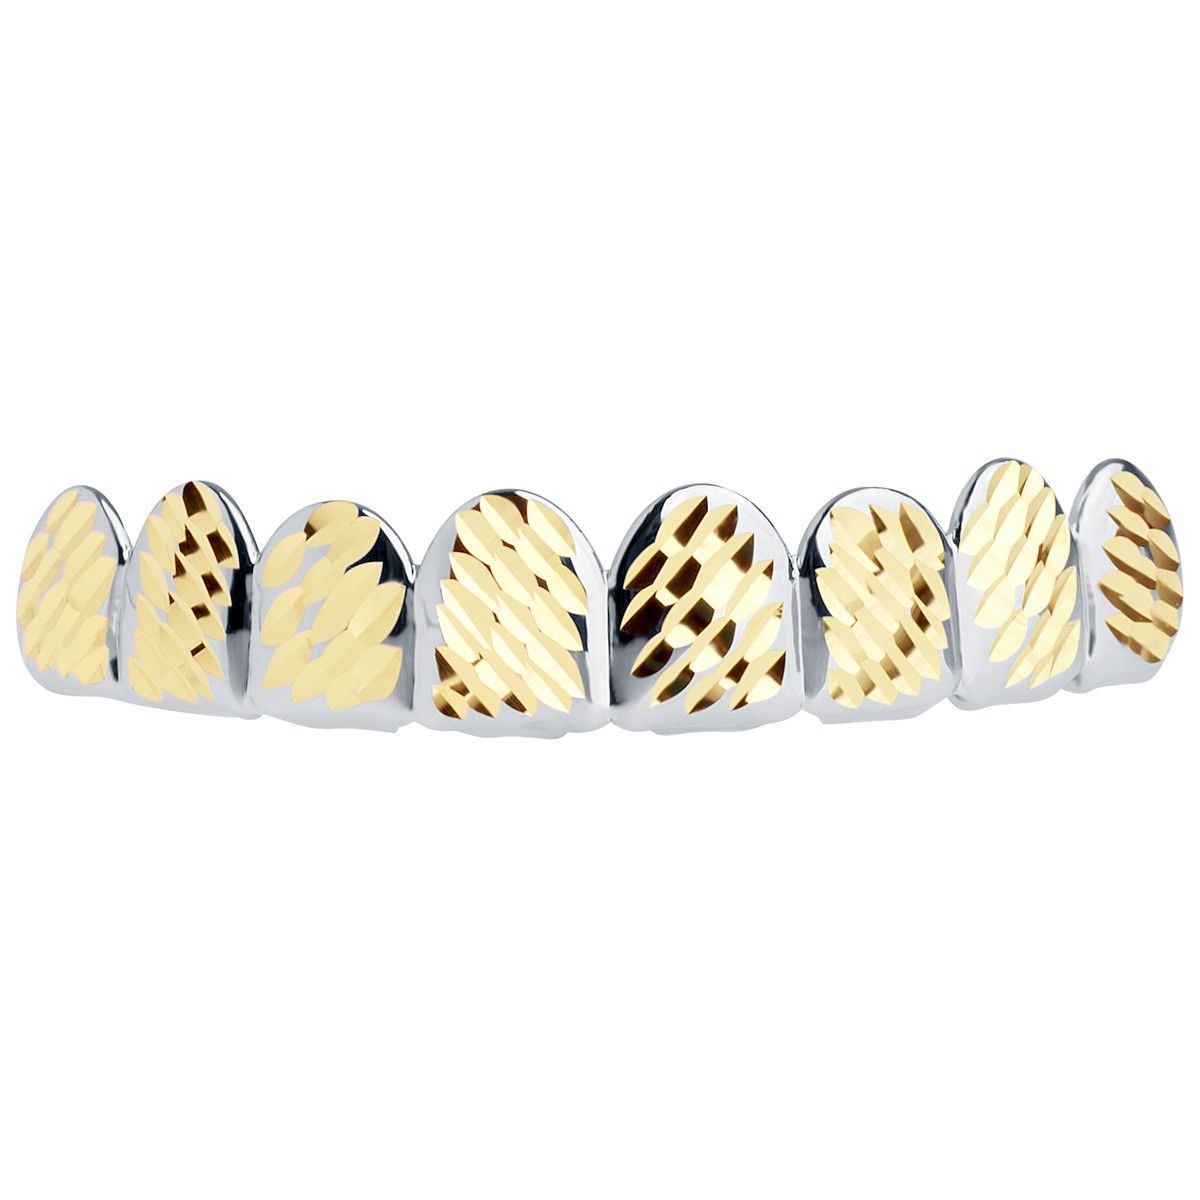 Silber Grillz – One size fits all – Full Size Diamond Cut IV